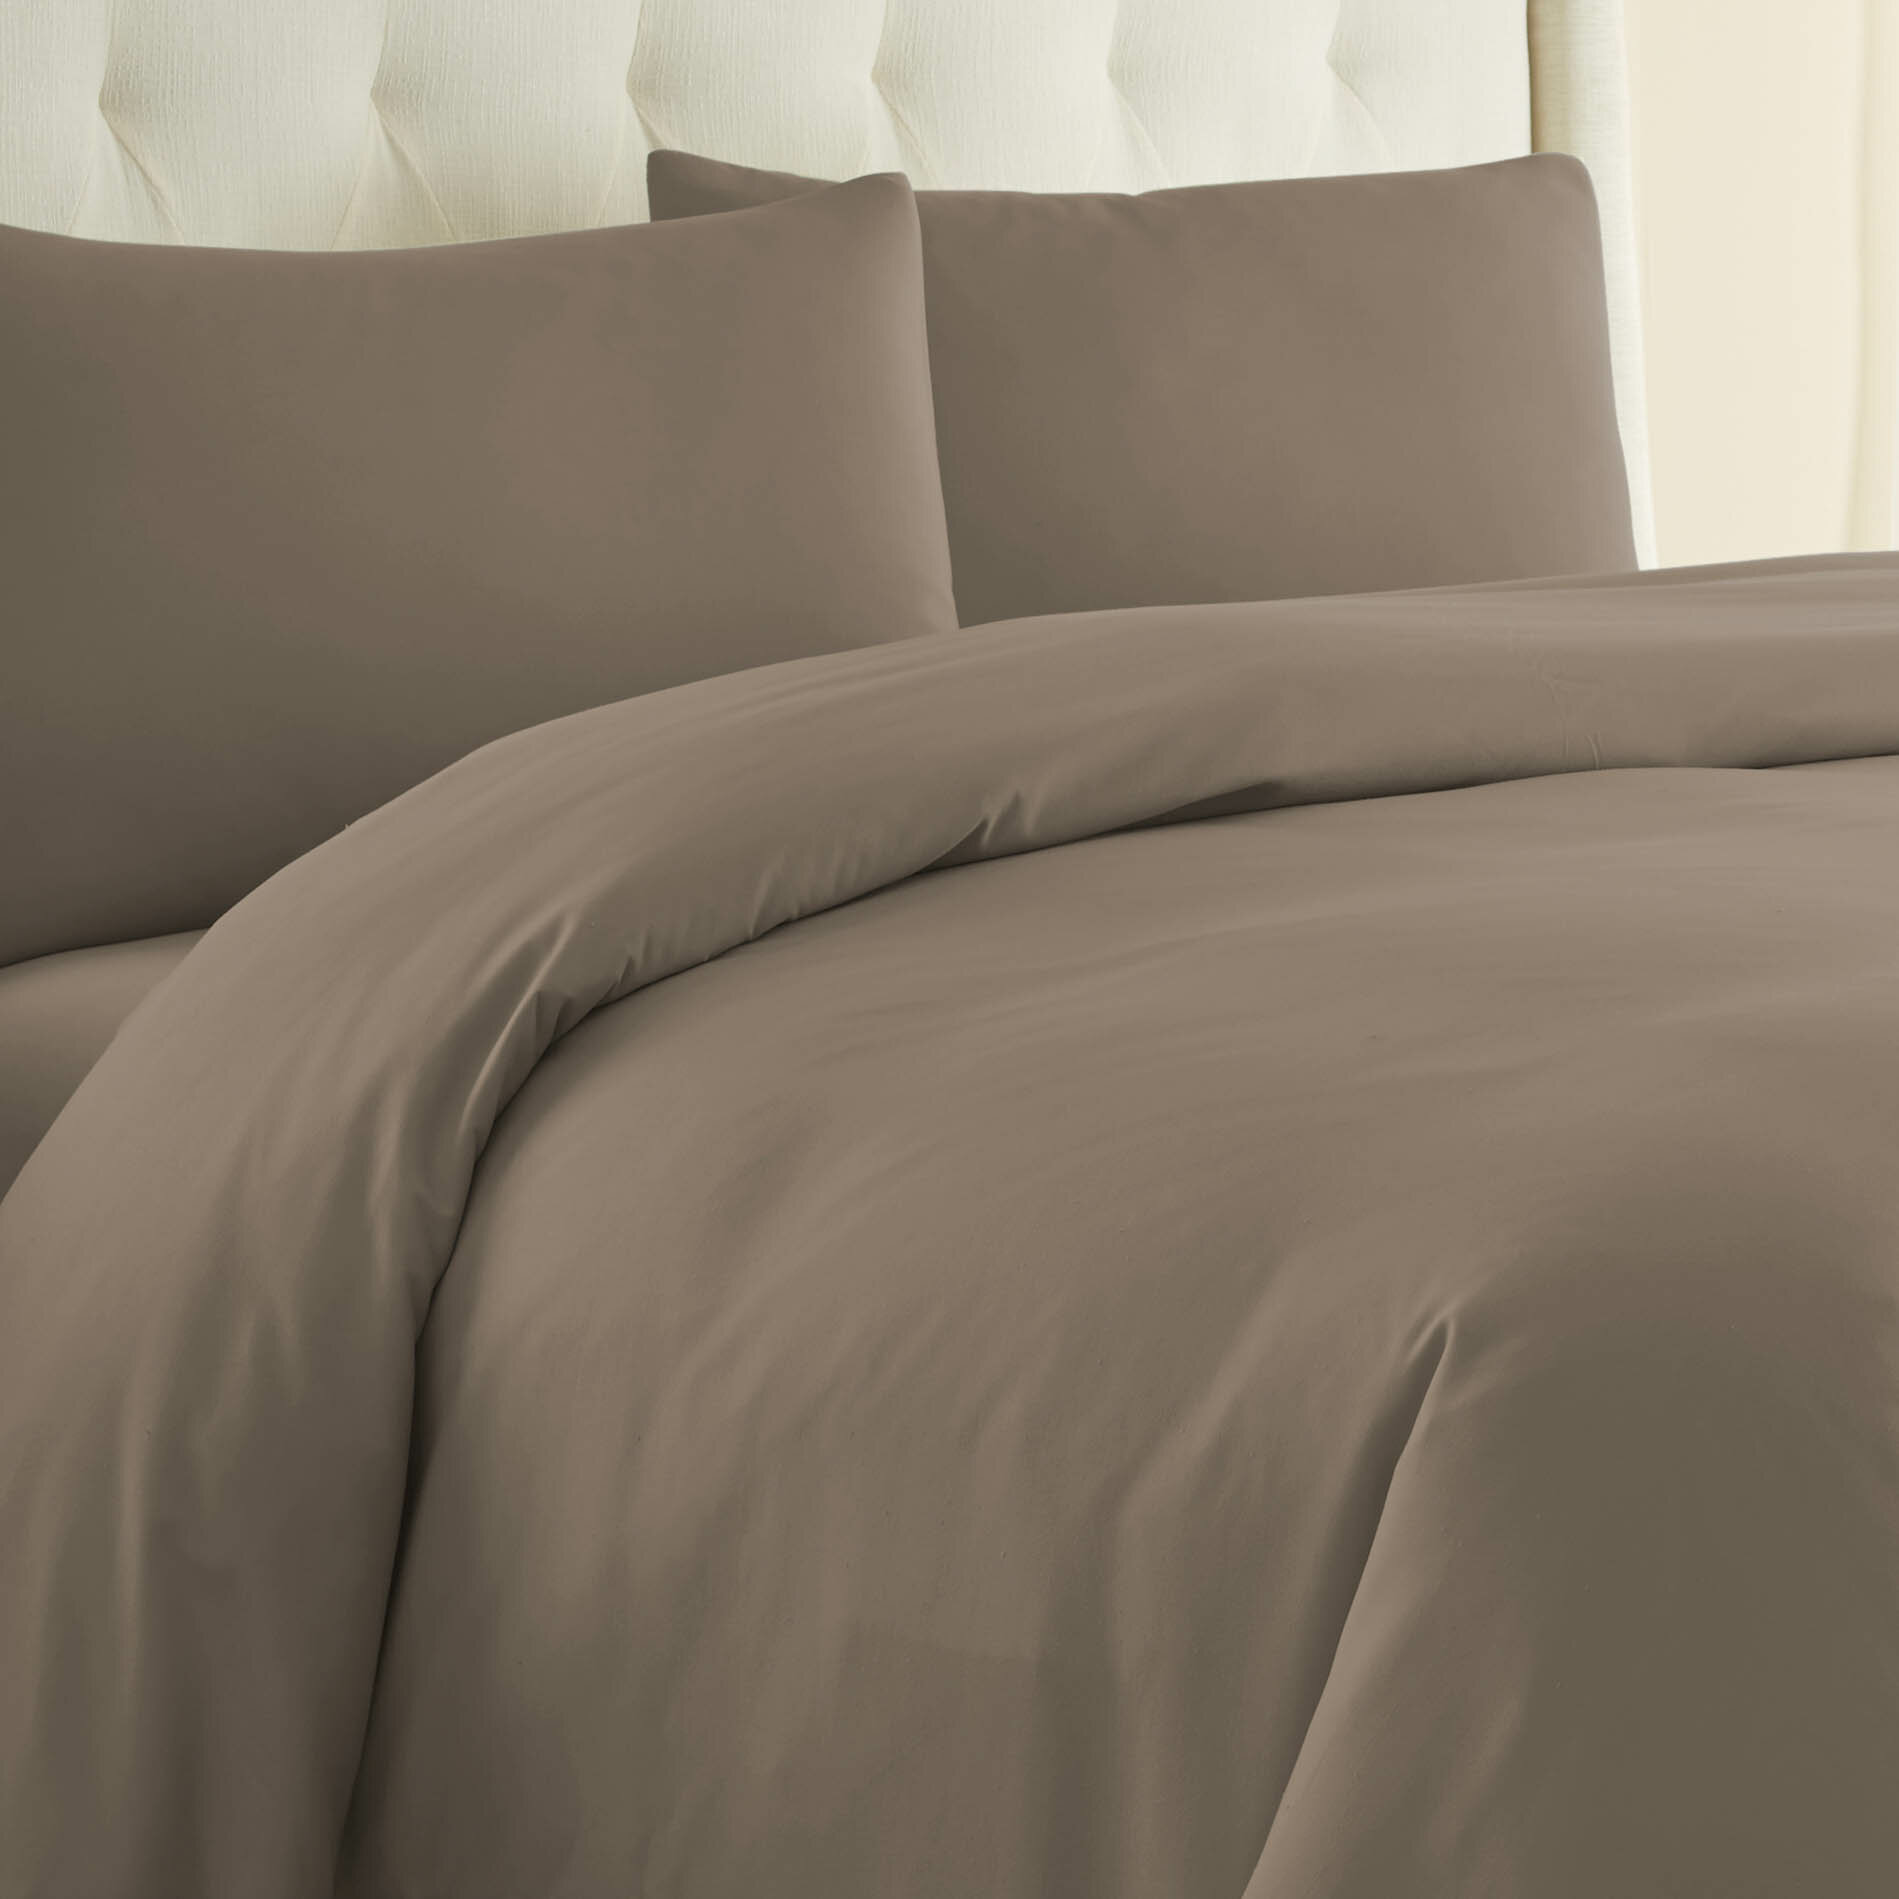 Brown Gray Silver Duvet Covers Sets You Ll Love In 2021 Wayfair